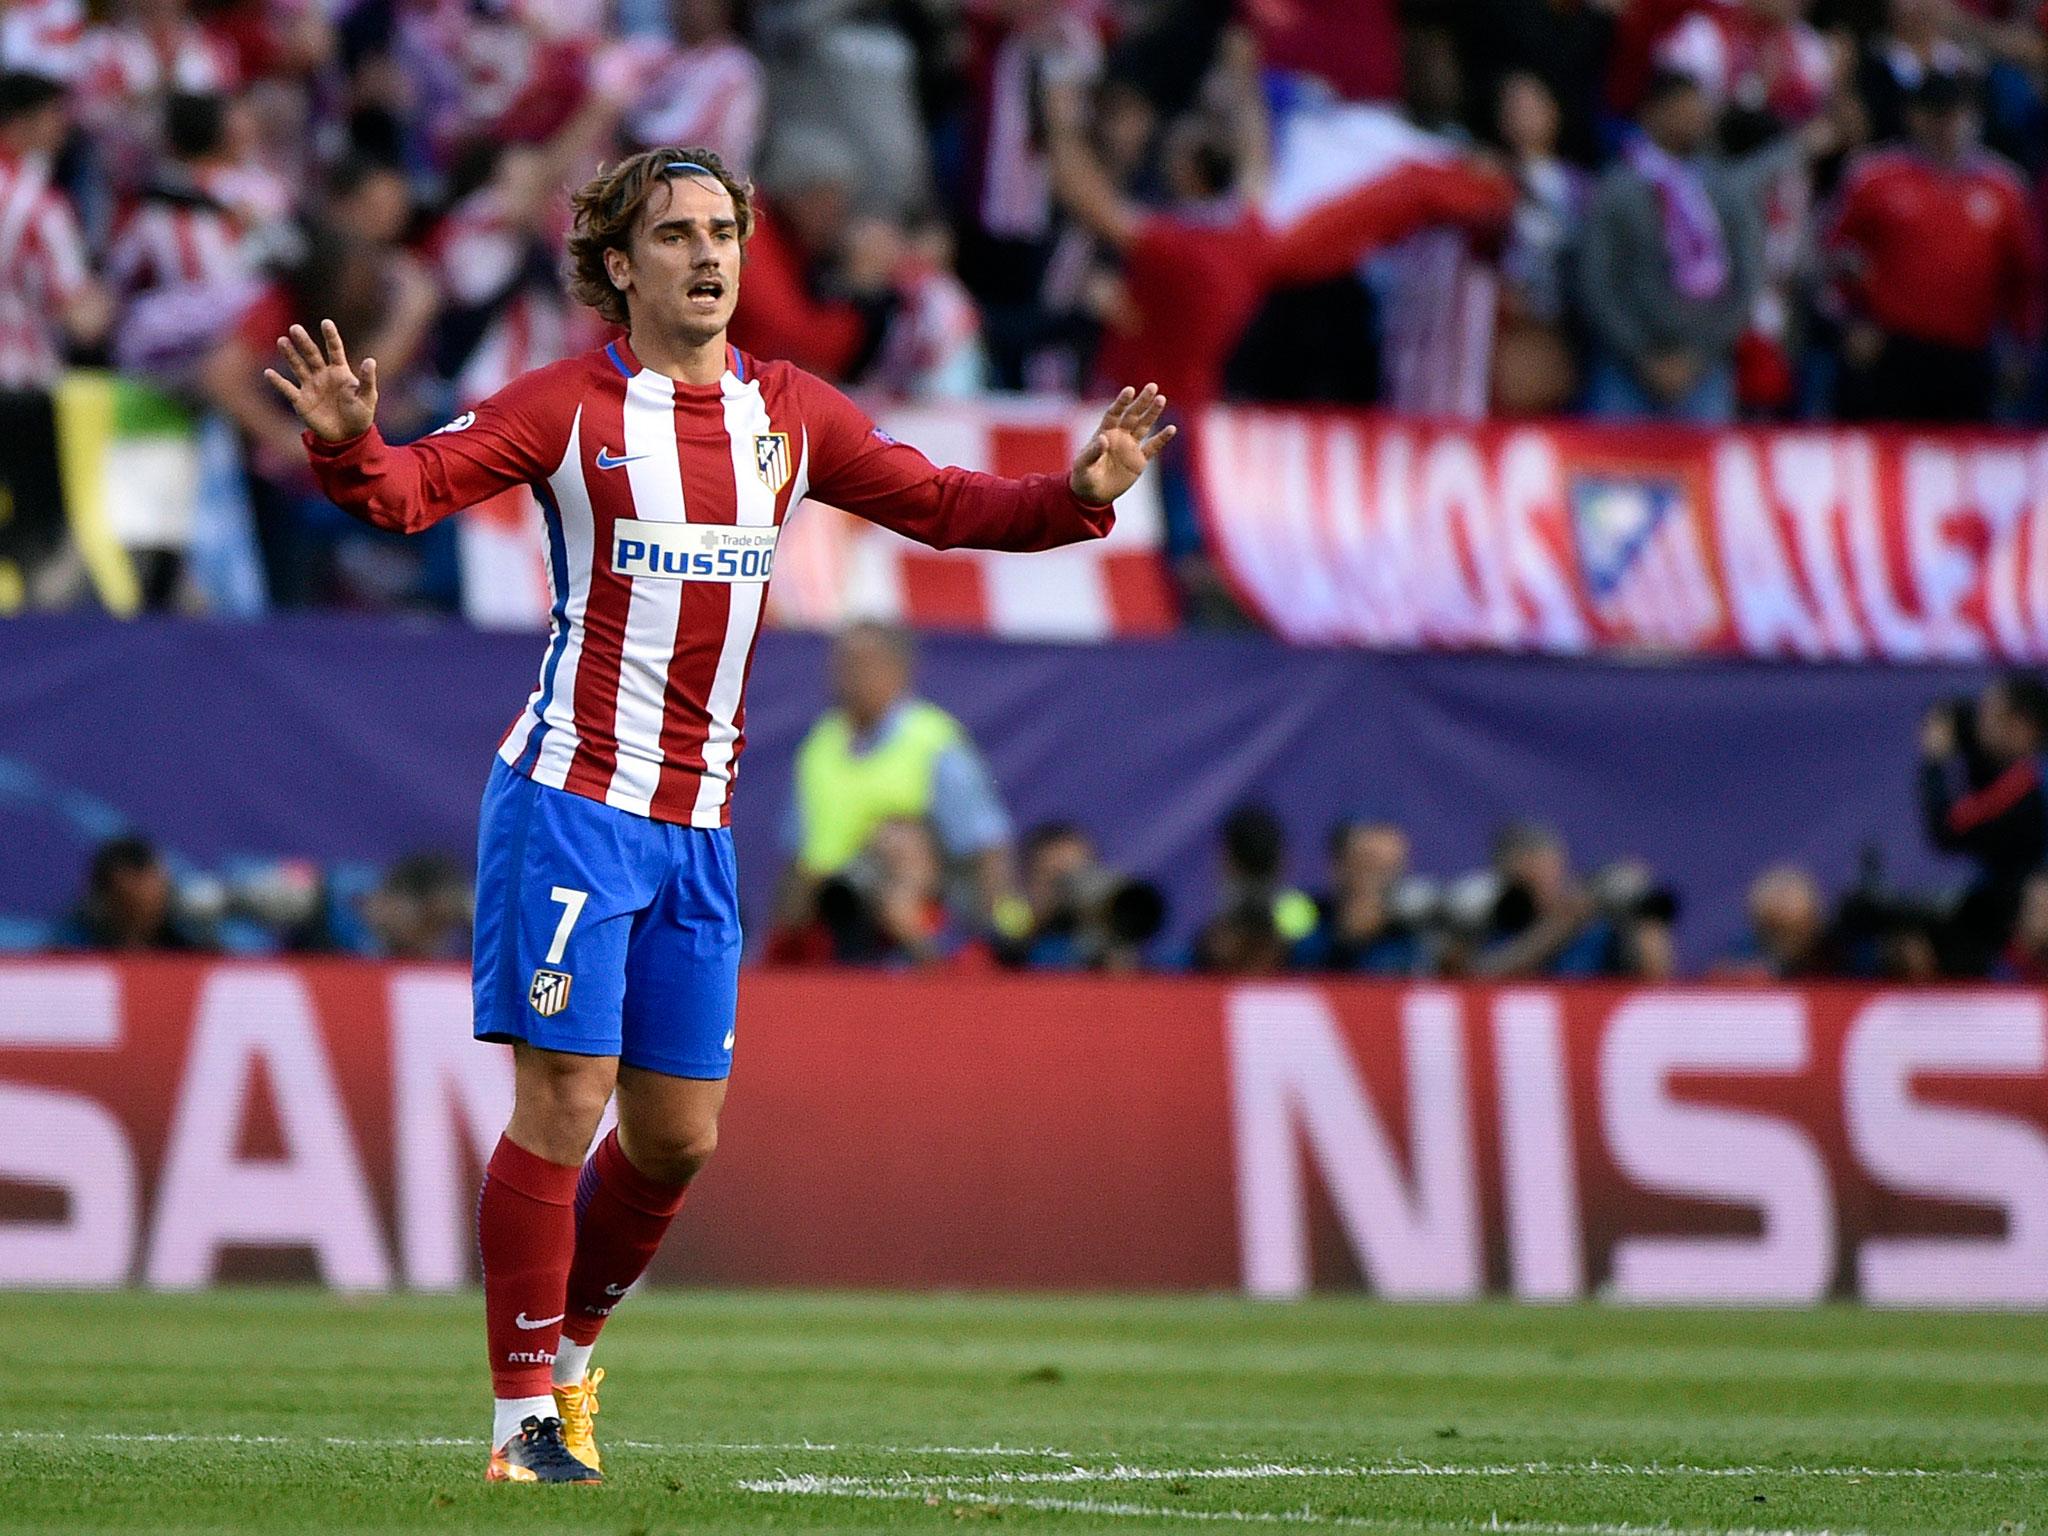 President Enrique Cerezo suggested no-one would meet Griezmann's release clause